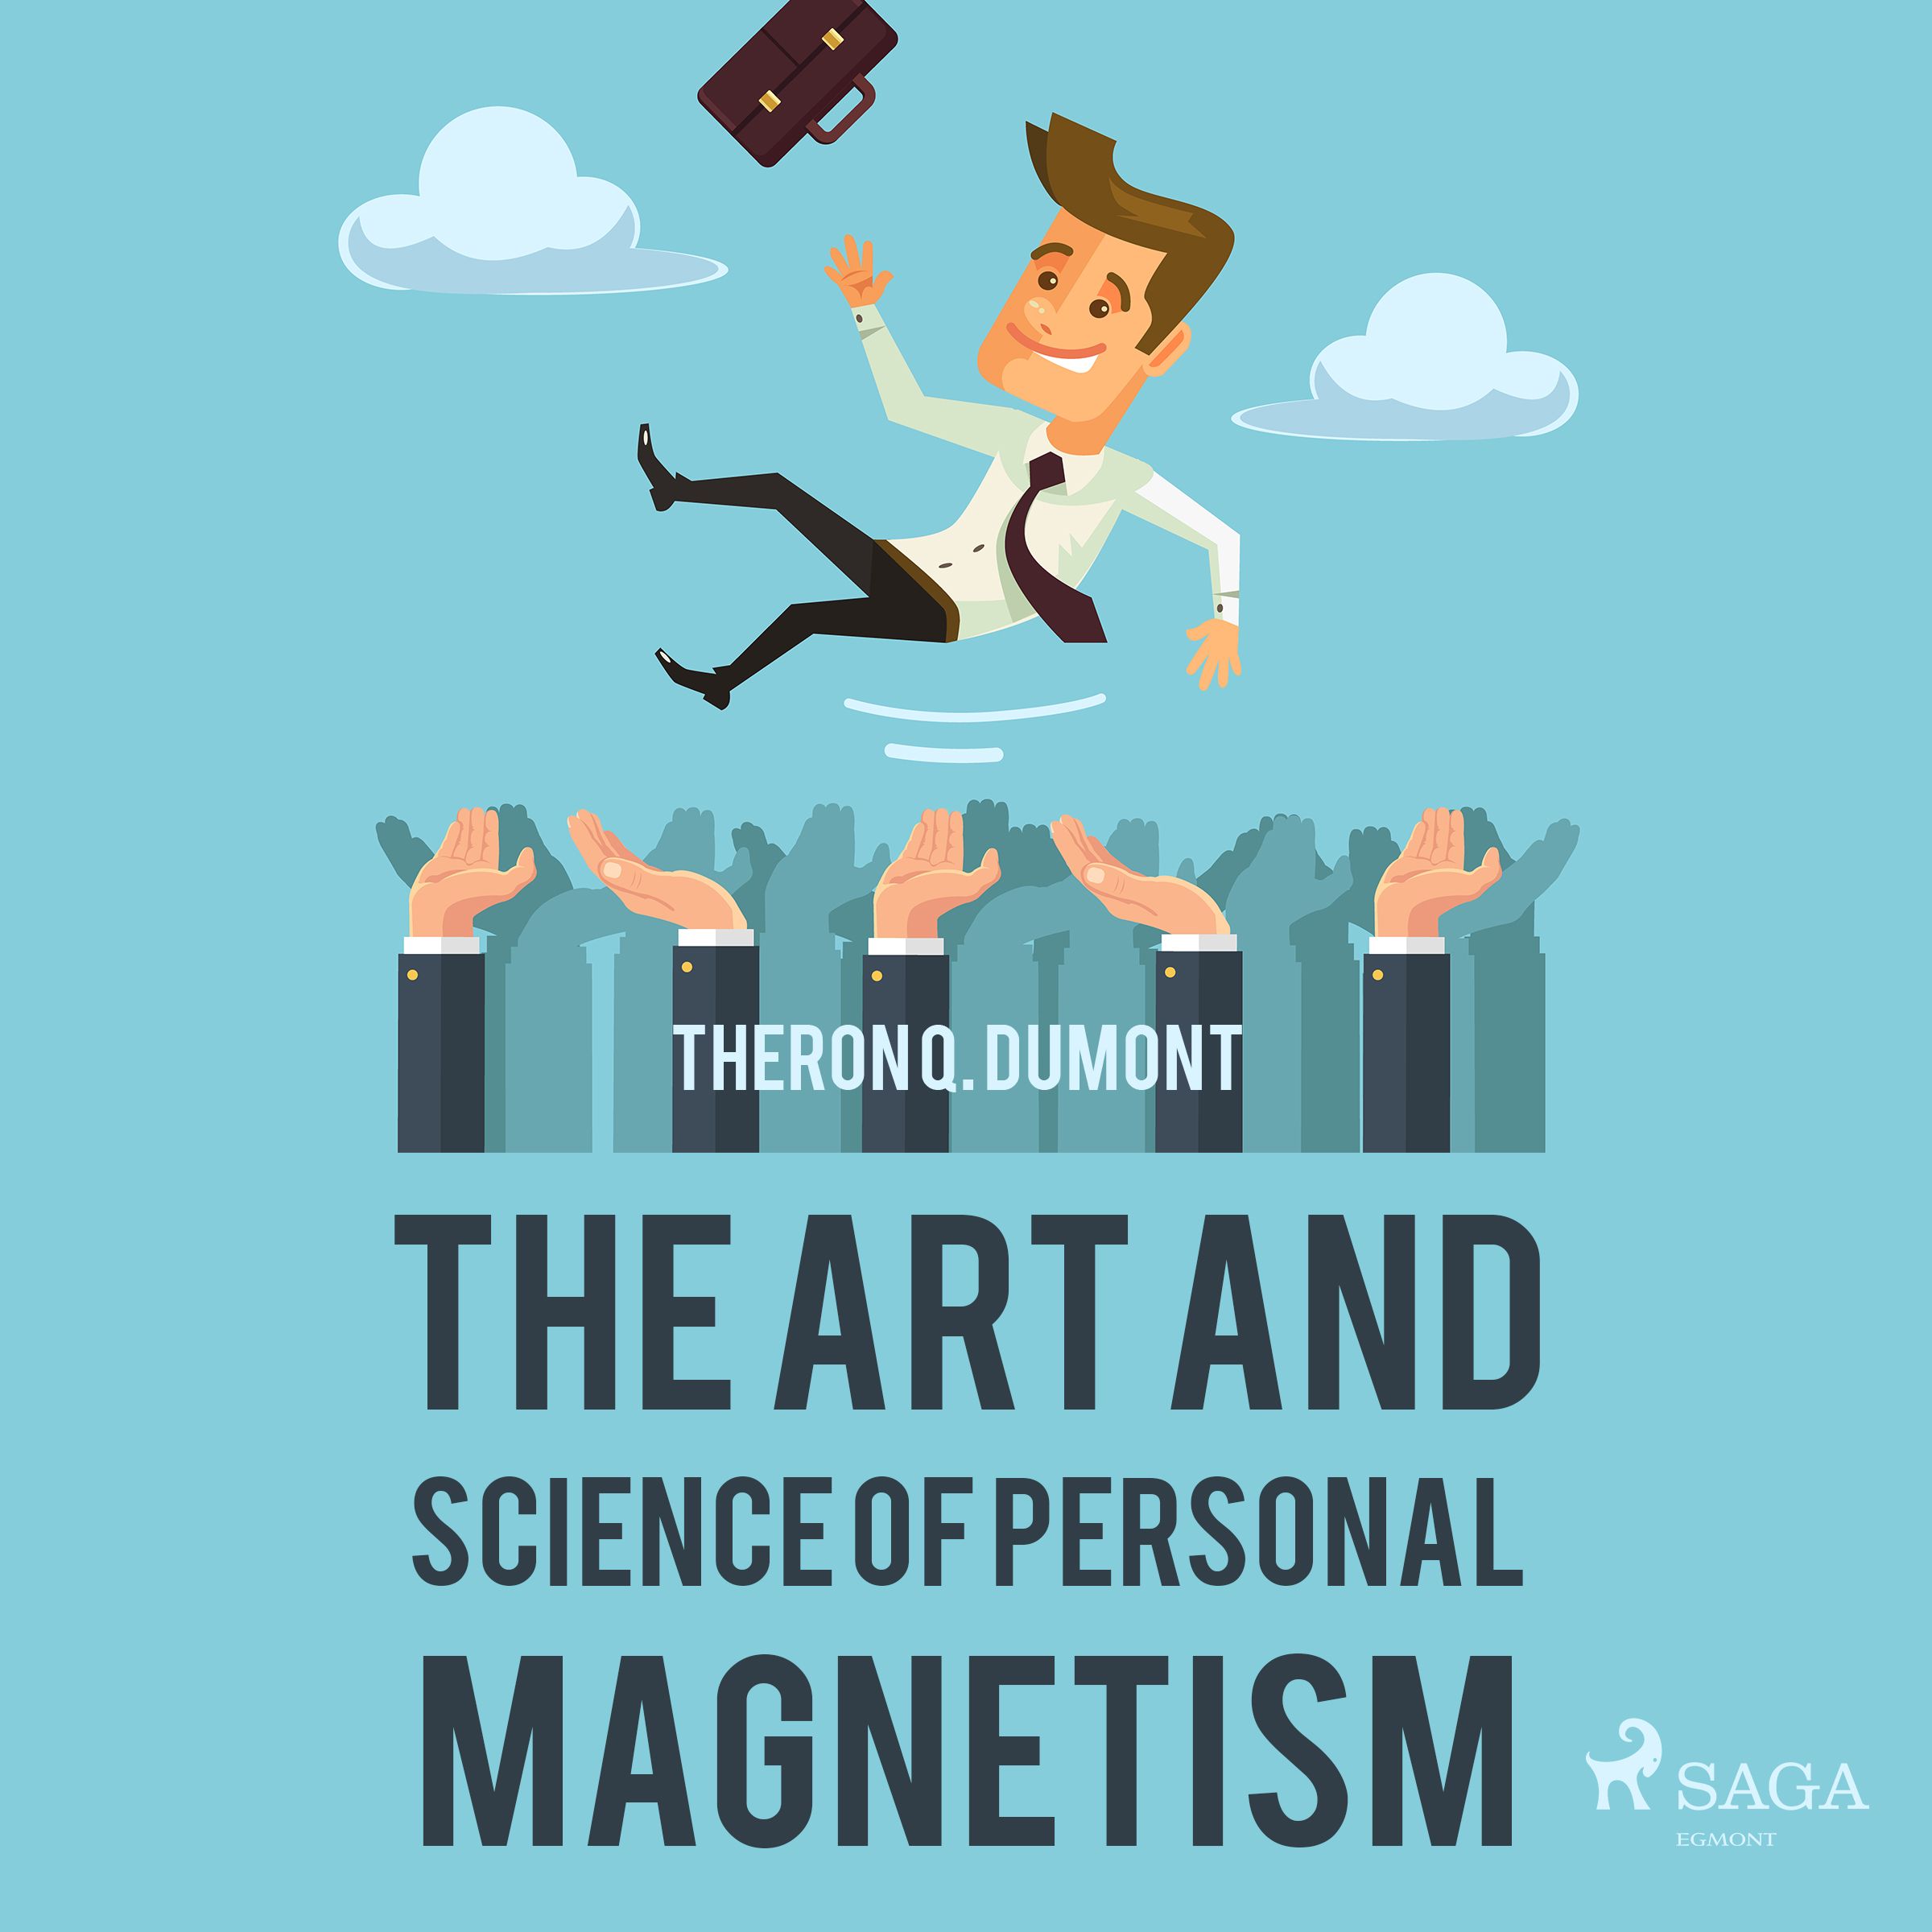 The Art and Science of Personal Magnetism, lydbog af Theron Q. Dumont